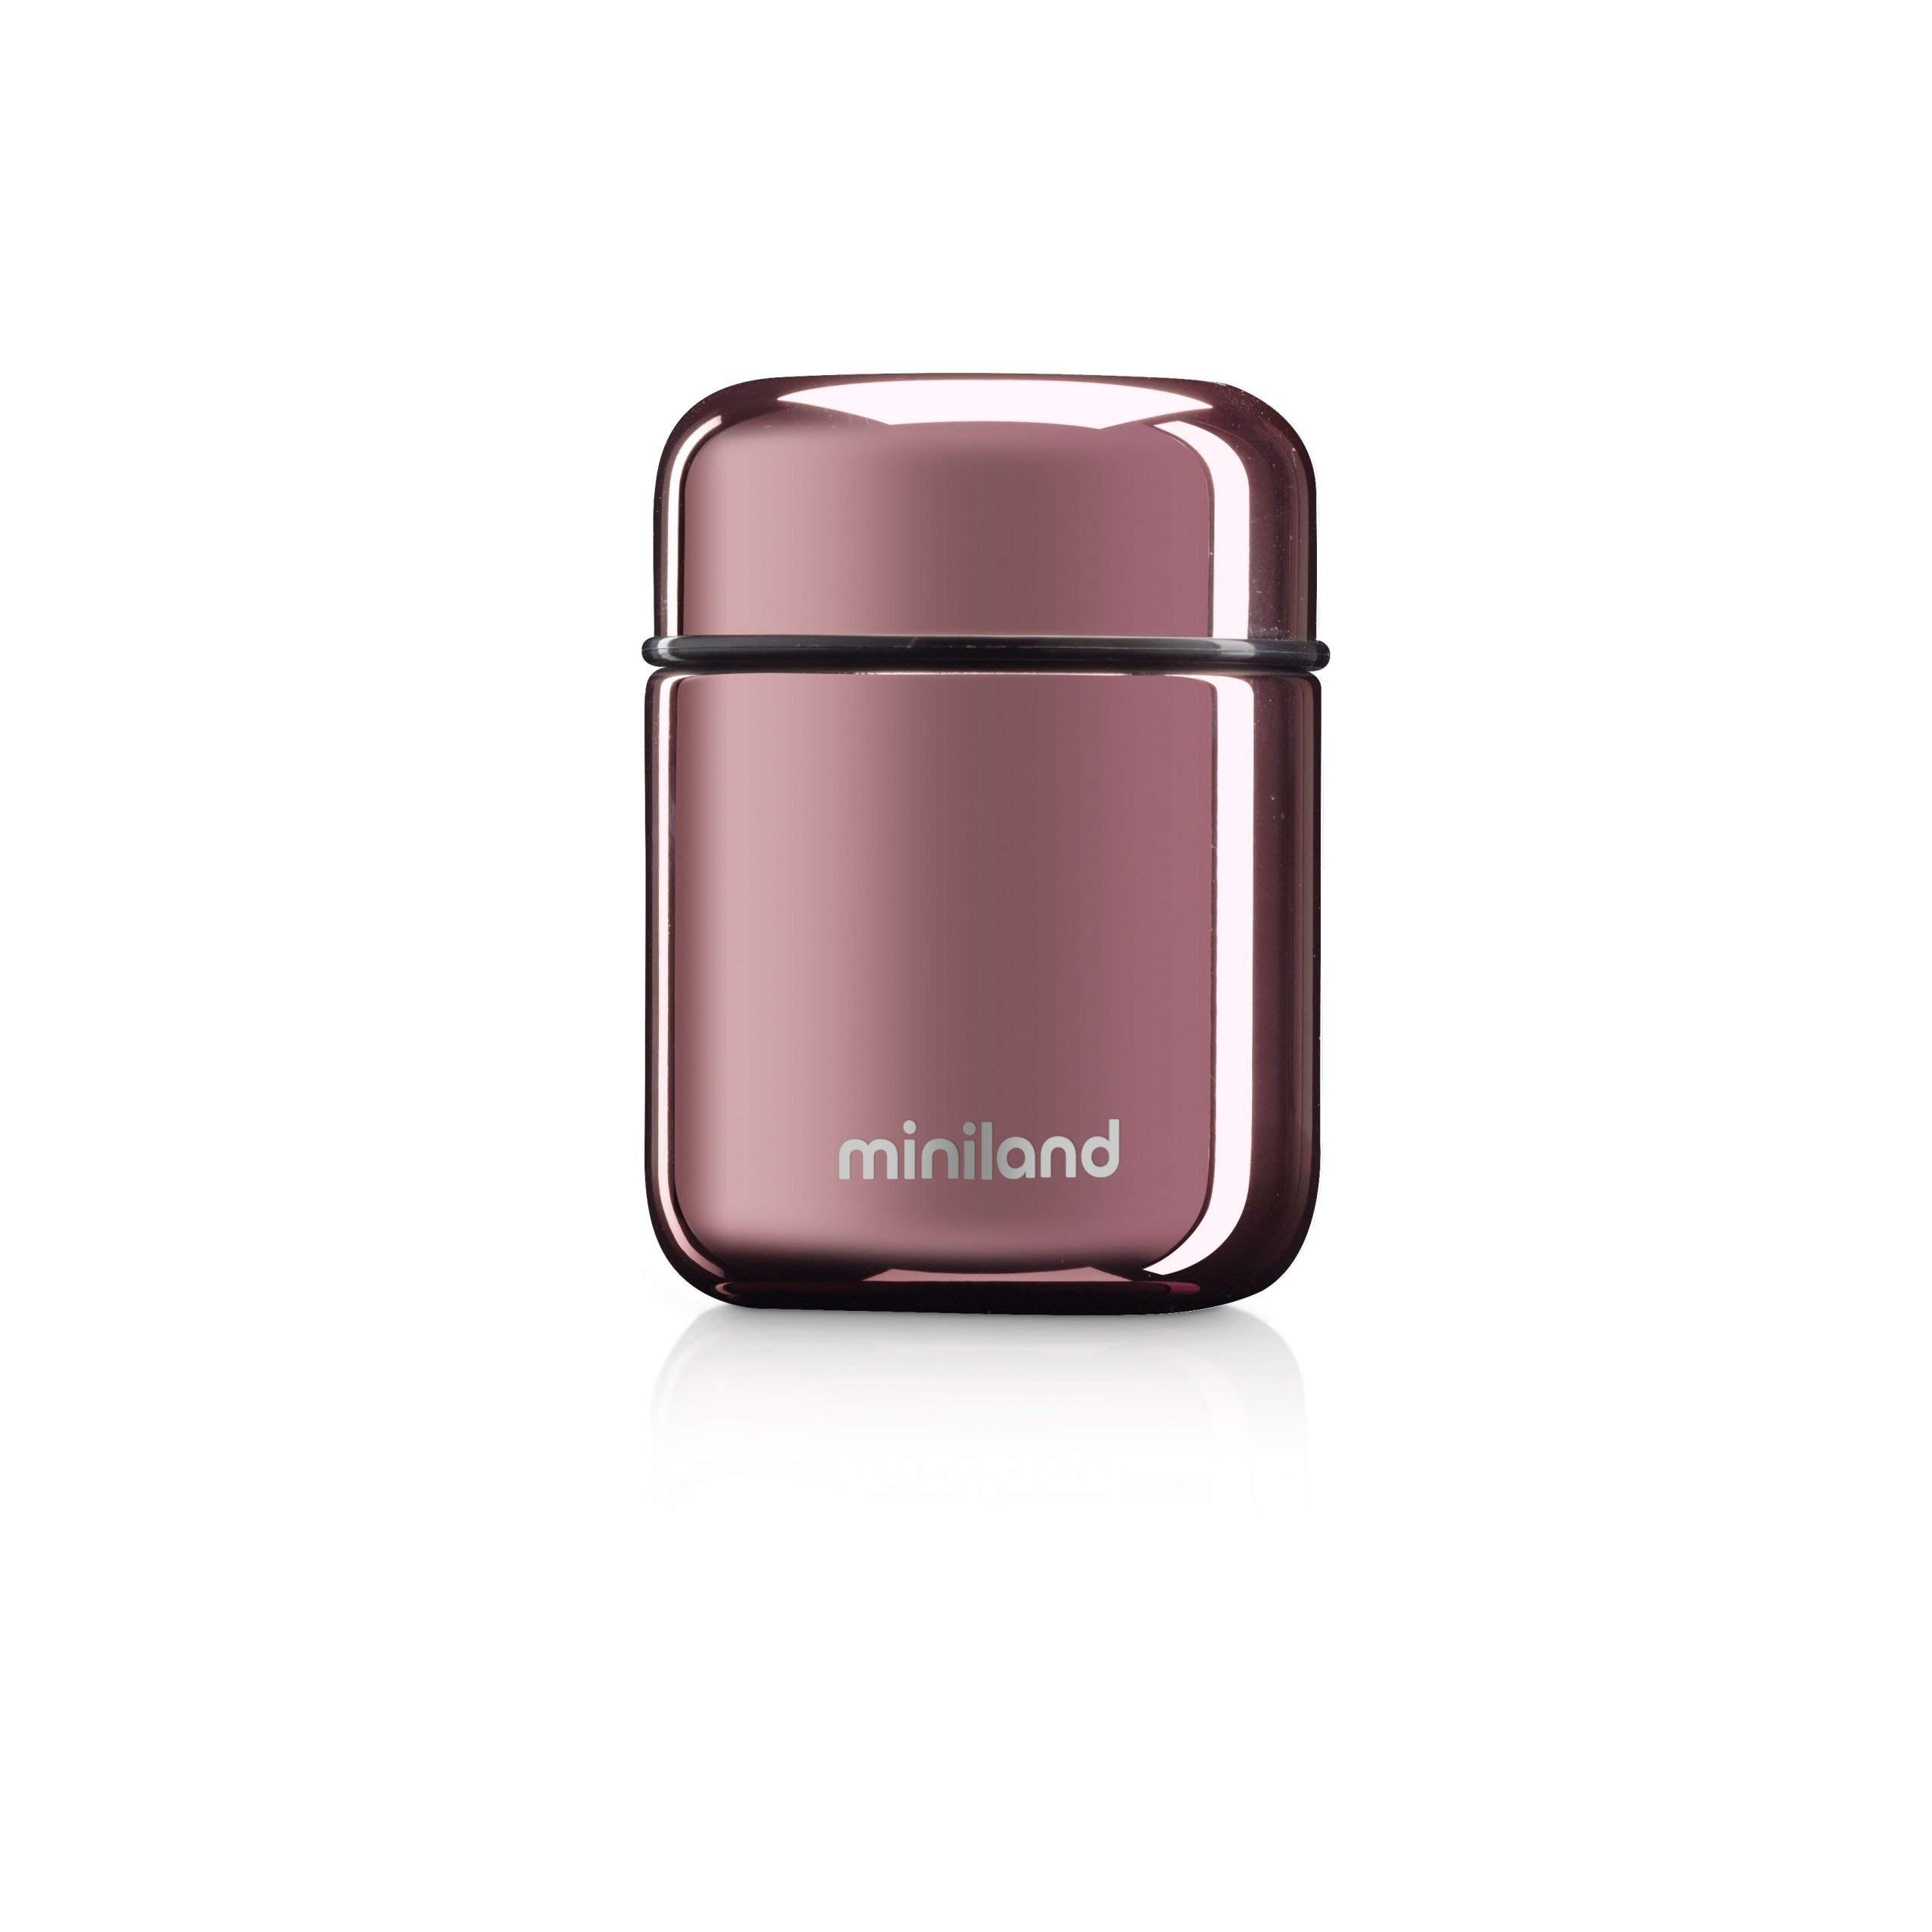 Miniland FOOD THERMOS MINI DELUXE ROSE, Isolierbehälter für Babynahrung, 280ml